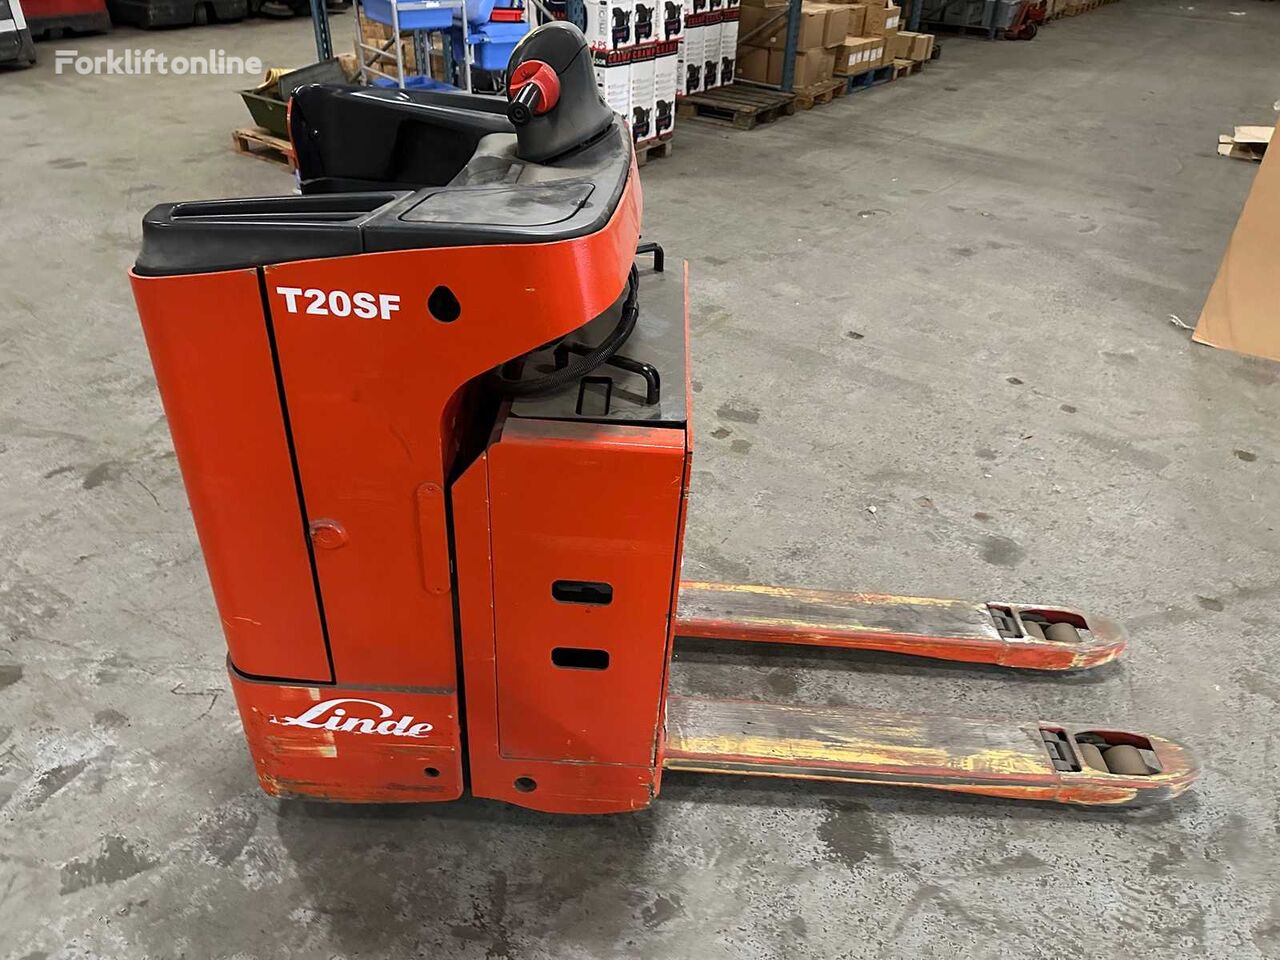 Linde T20SF electric pallet truck